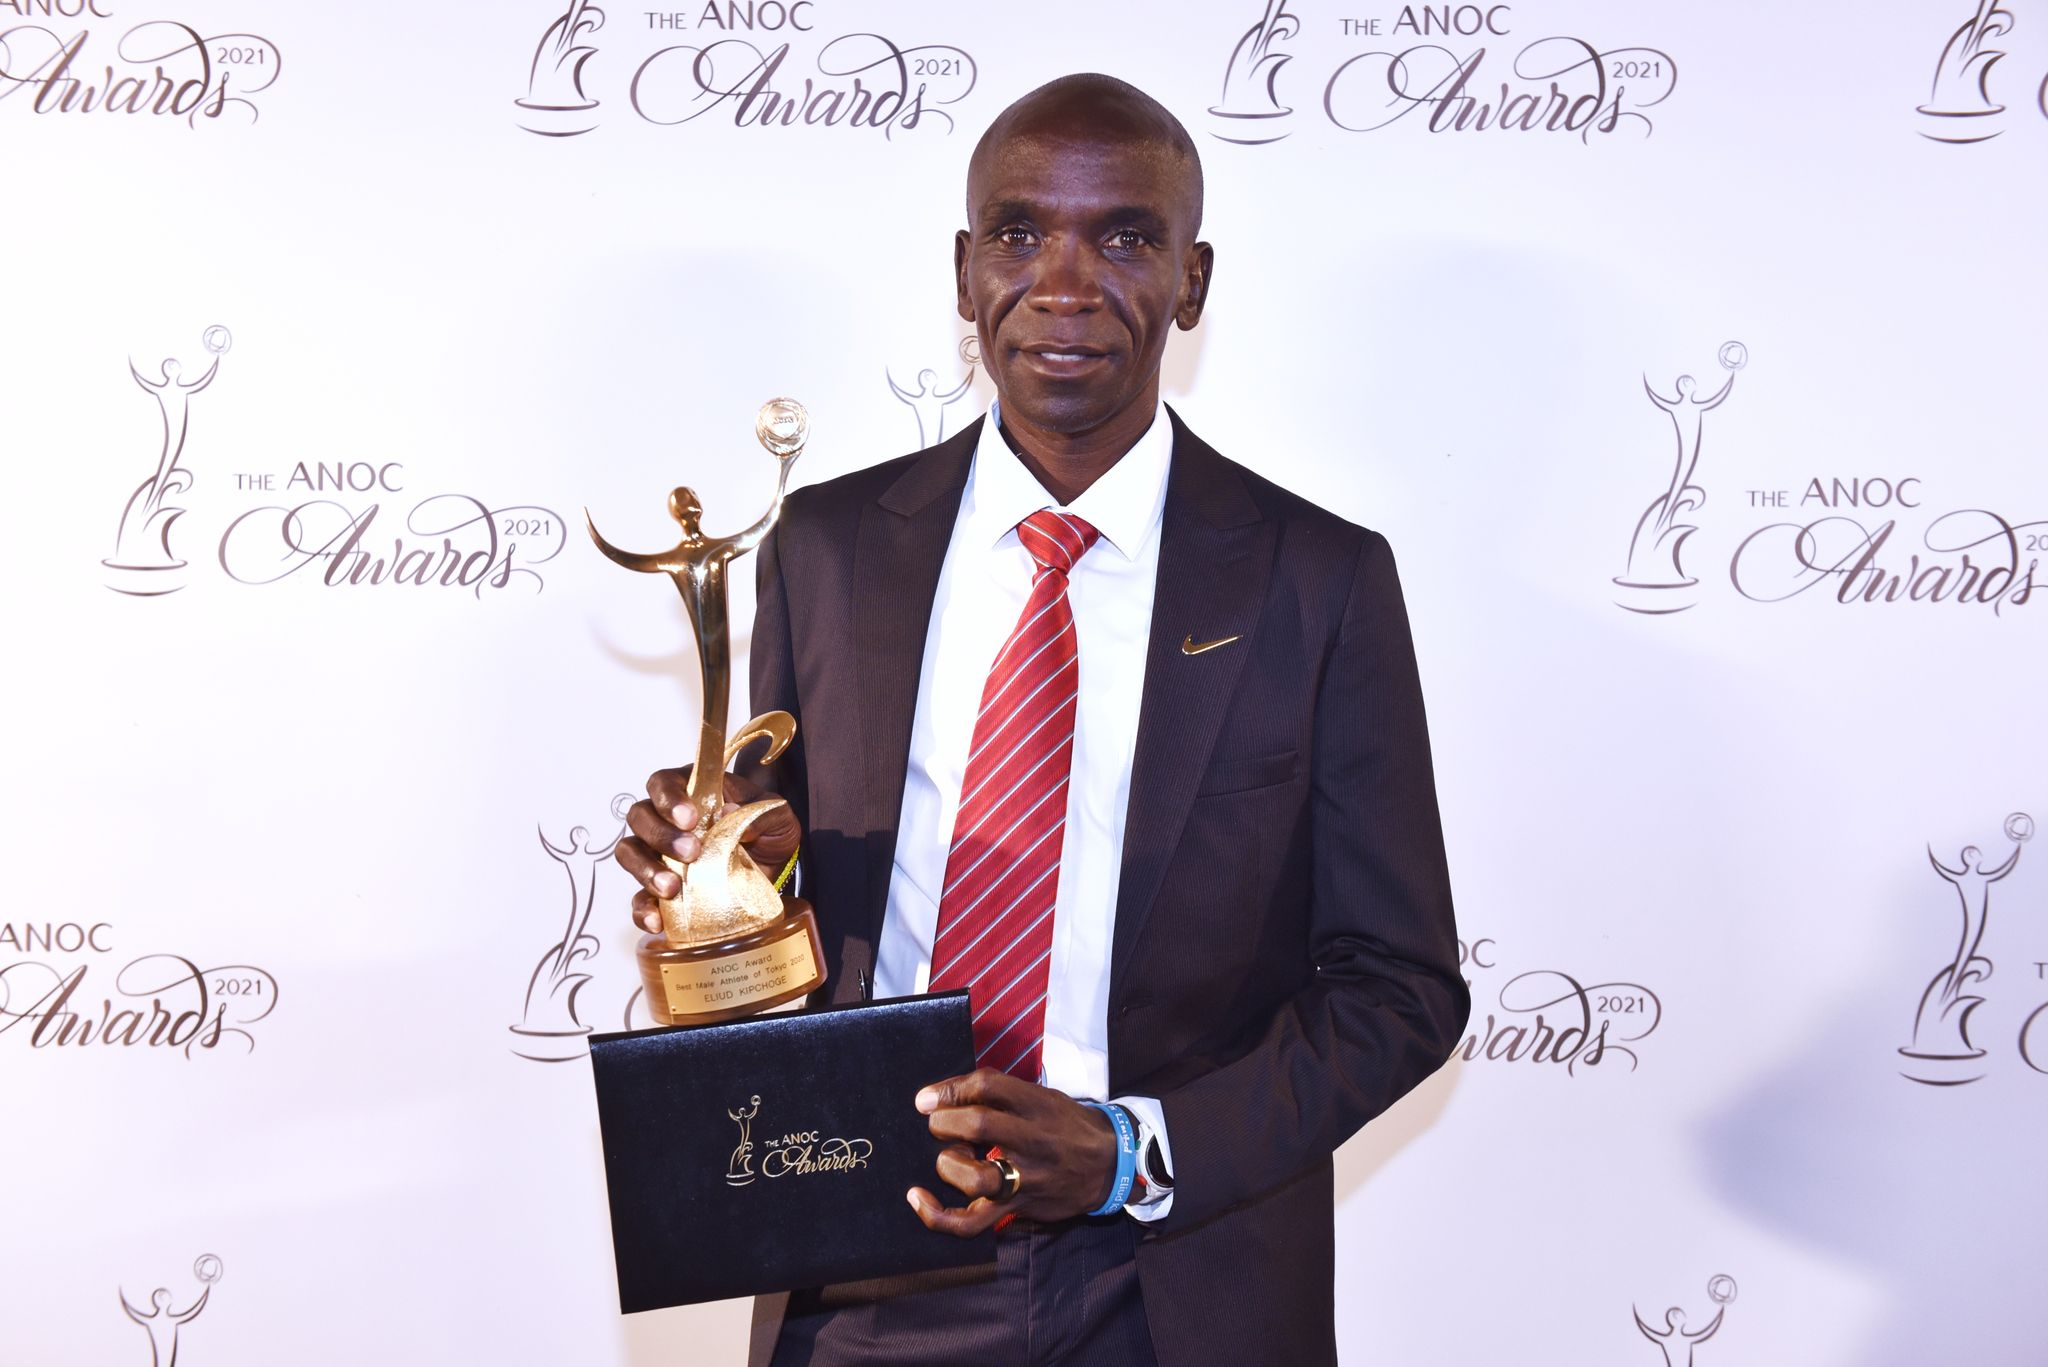 Olympic legends Kipchoge and López among athletes honoured at ANOC Awards